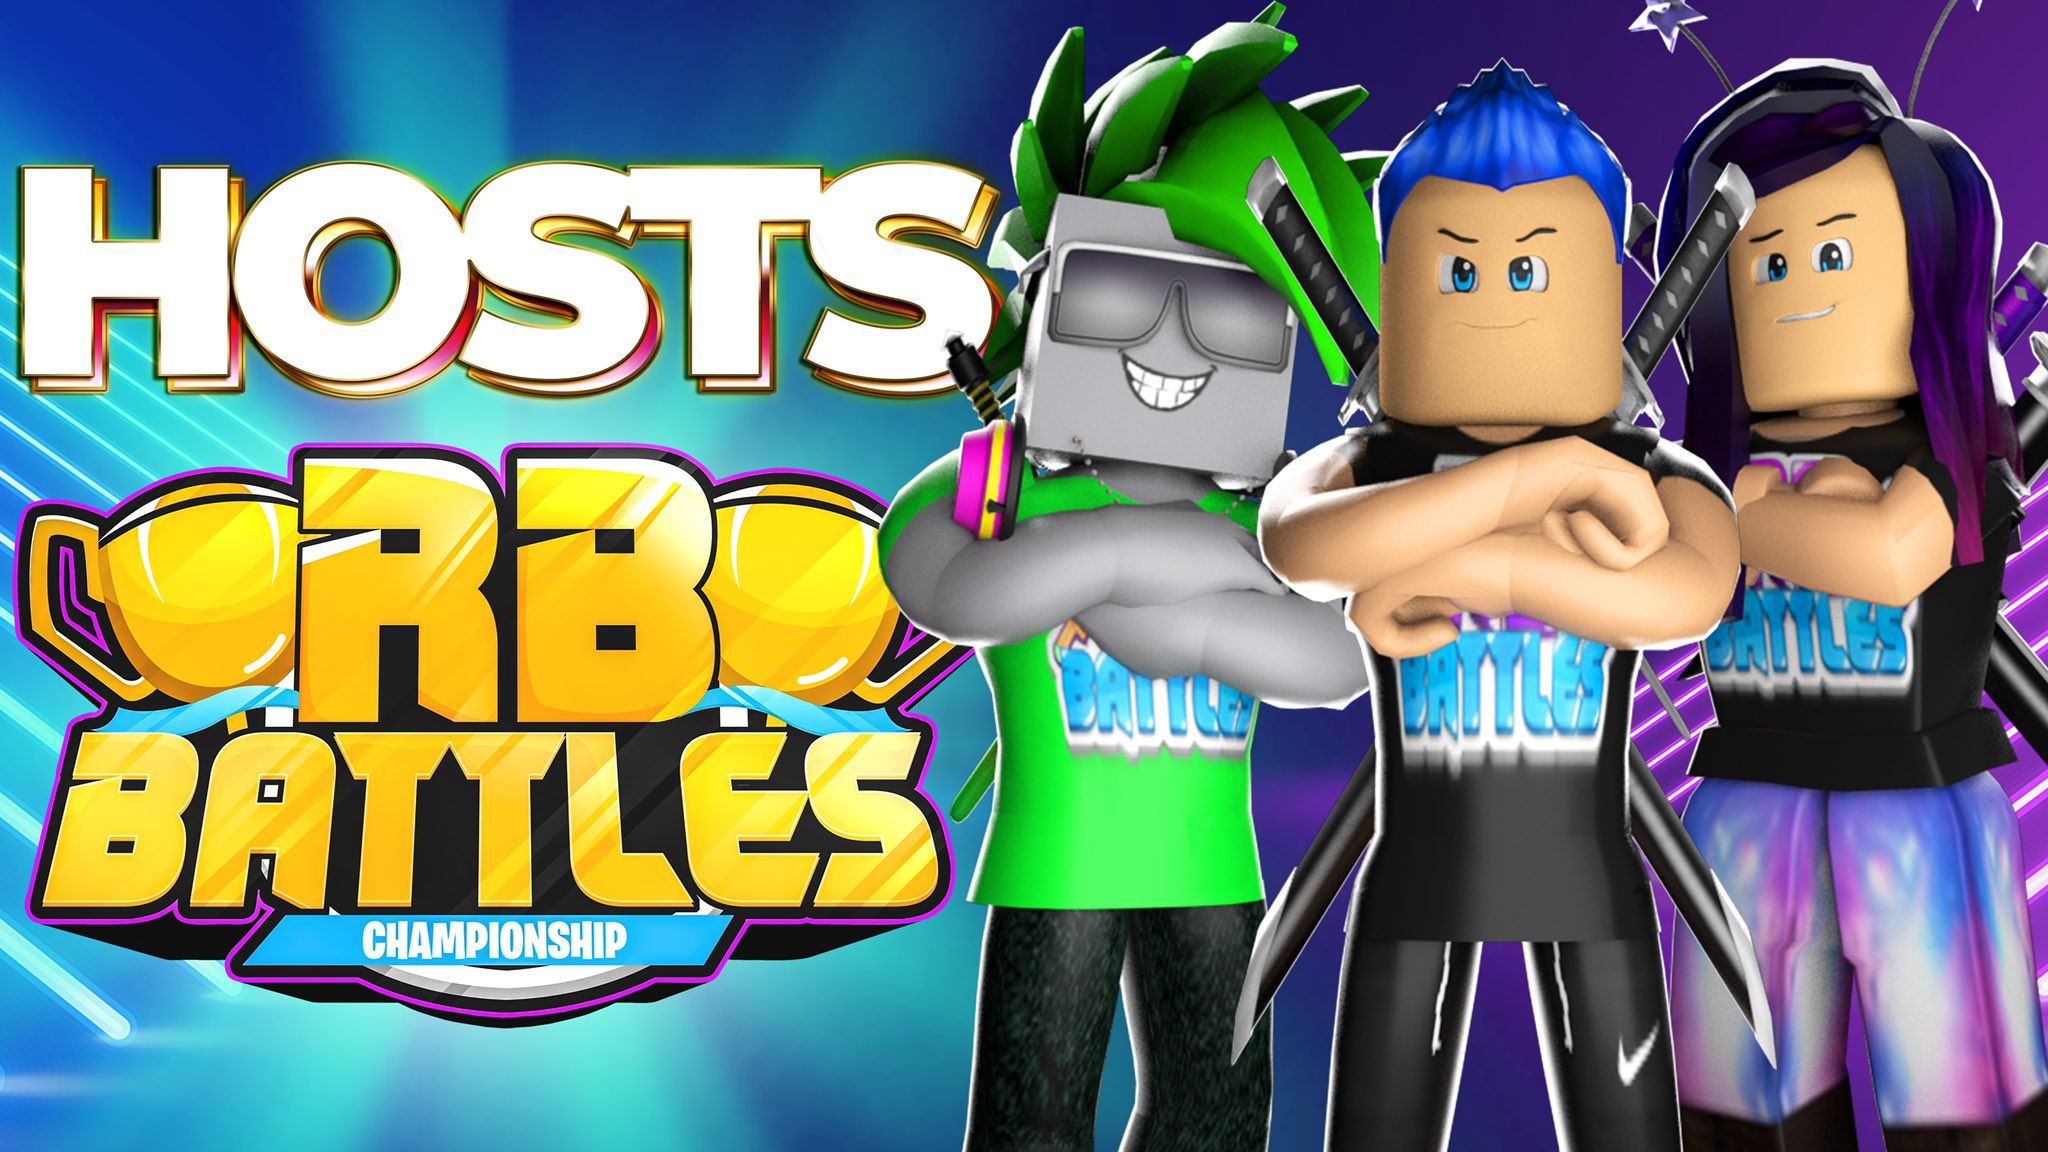 Roblox Battles. Your hosts!! ⚔️ ⚔️ ⚔️ ⚔️ ⚔️ ⚔️ The action begins TOMORROW! Make sure you're subscribed to the RB Battles YouTube channel to see